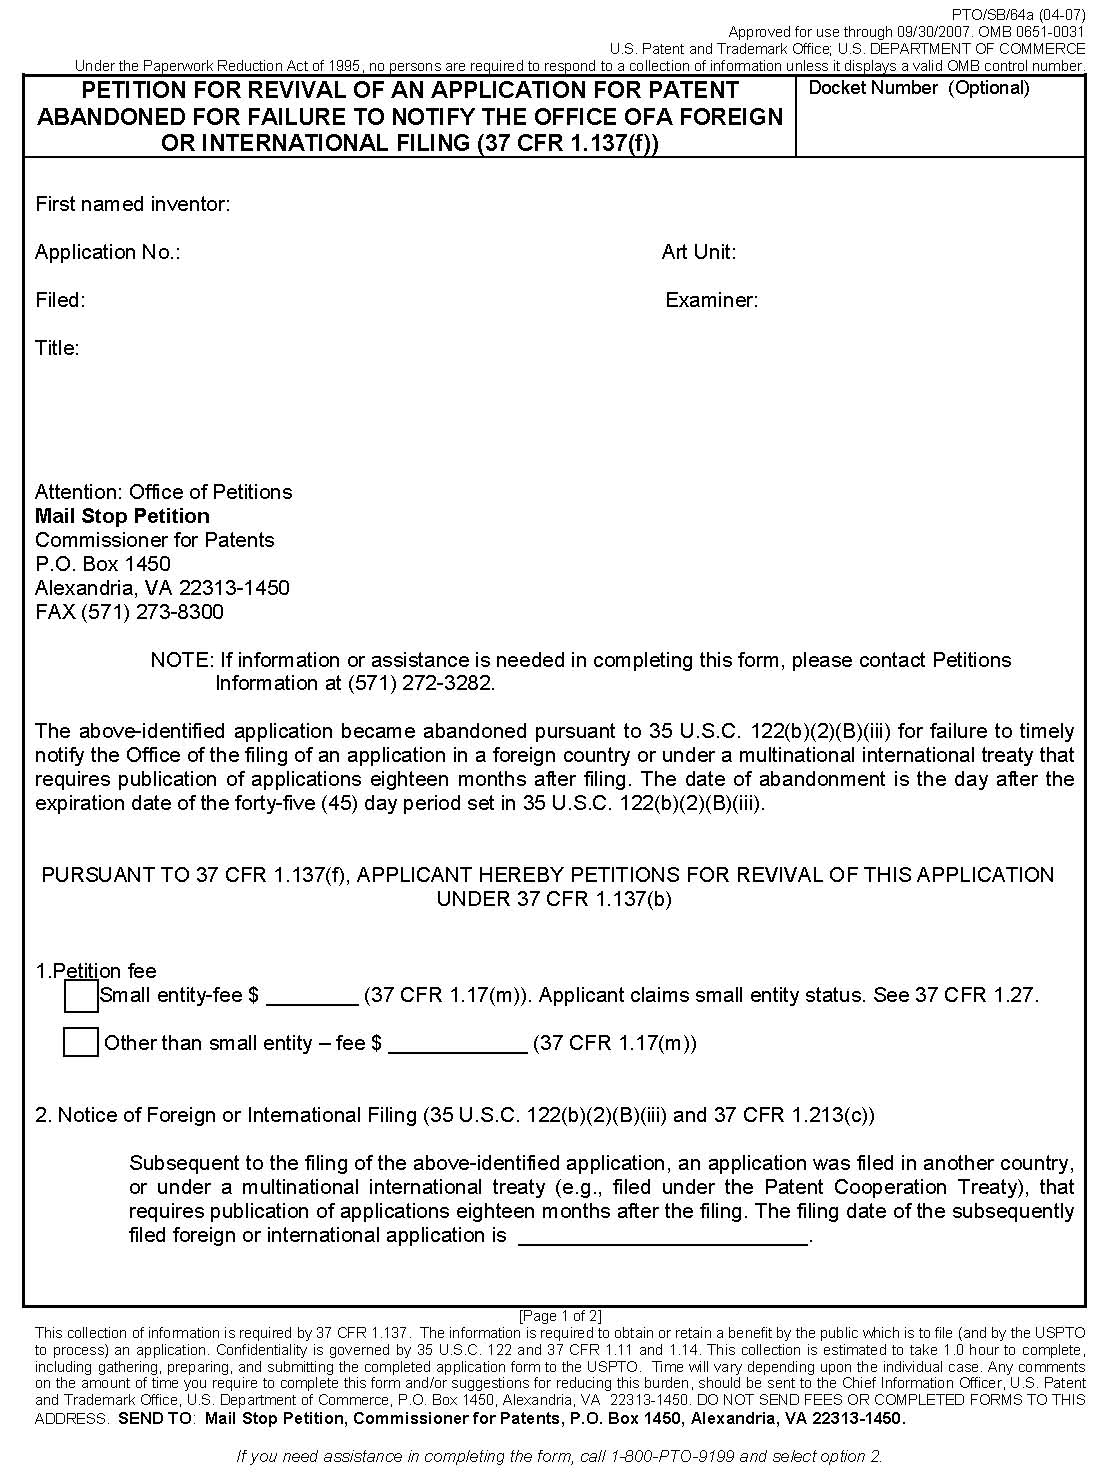 page 1 form pto/sb/64a petition for revival of an application for patent abandoned for failure to notify the office of a foreign or international filing (37 cfr 1.137(f).